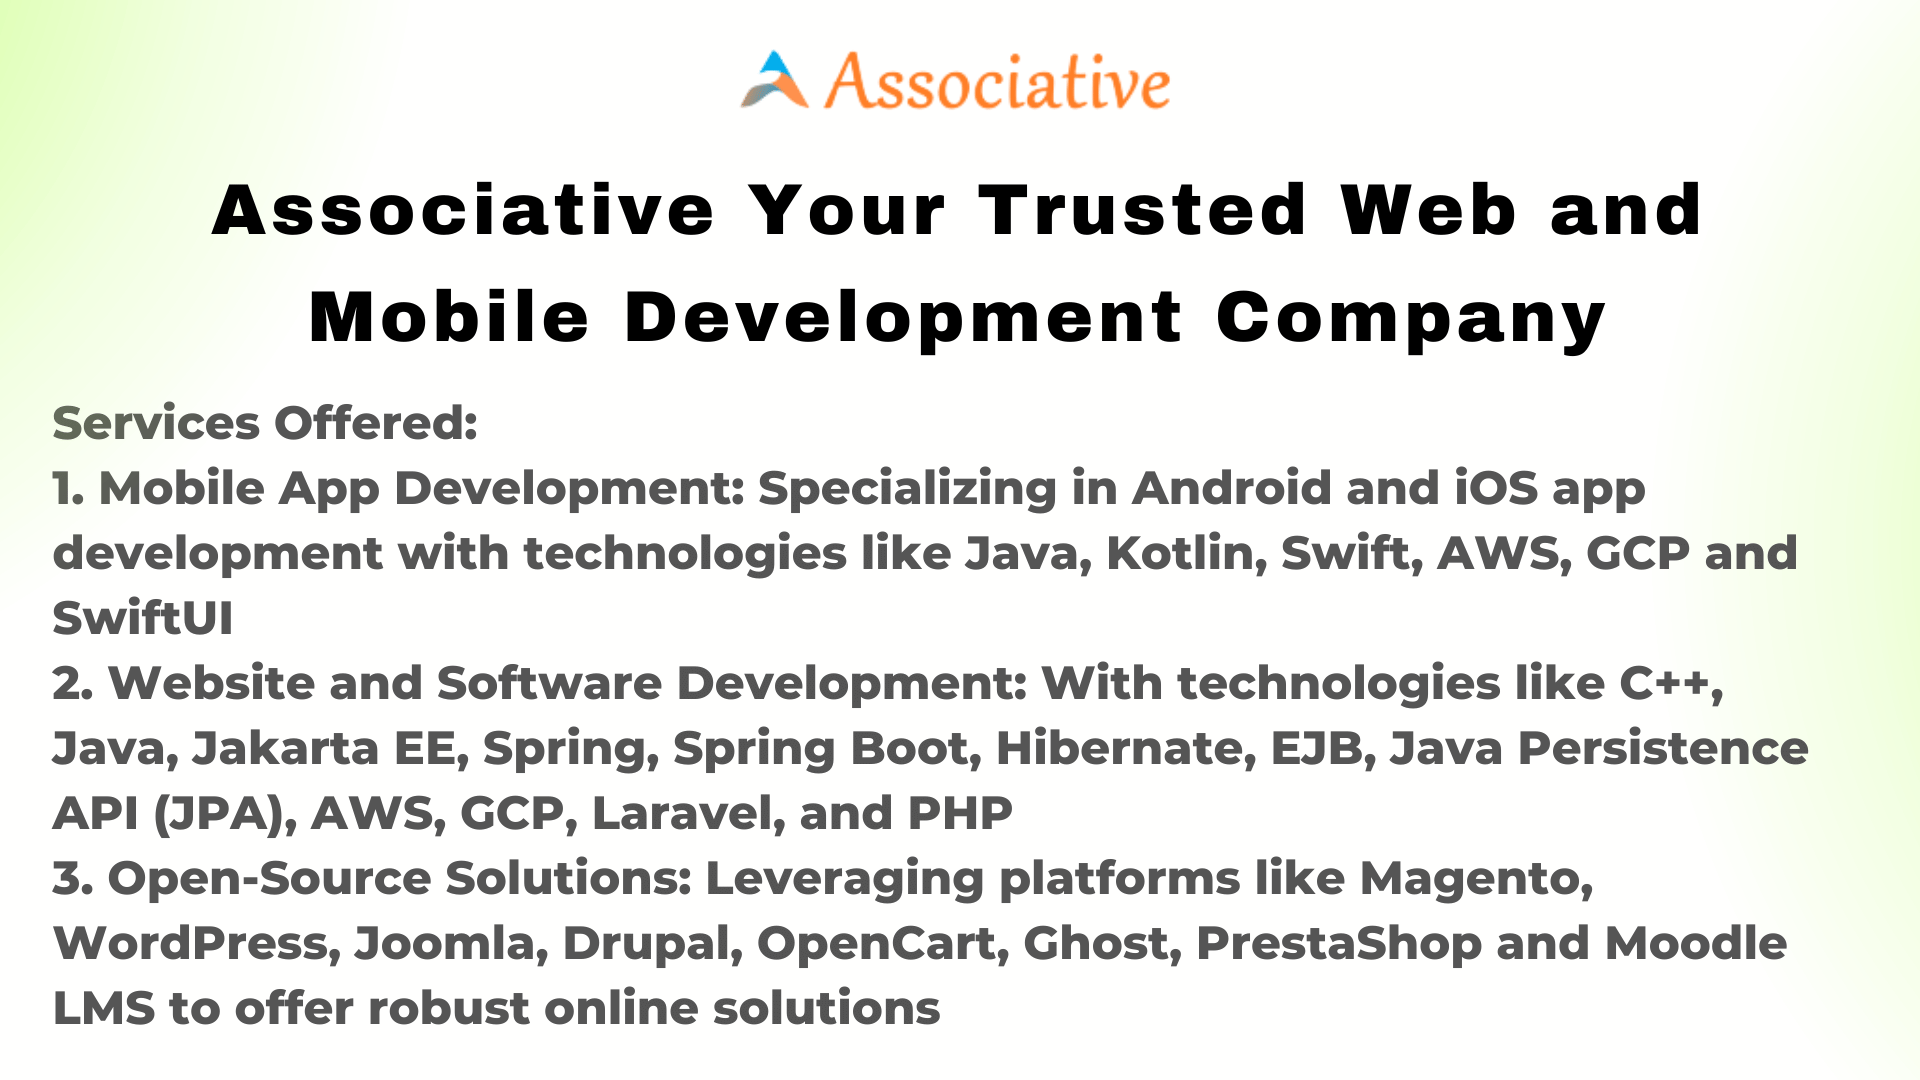 Associative Your Trusted Web and Mobile Development Company